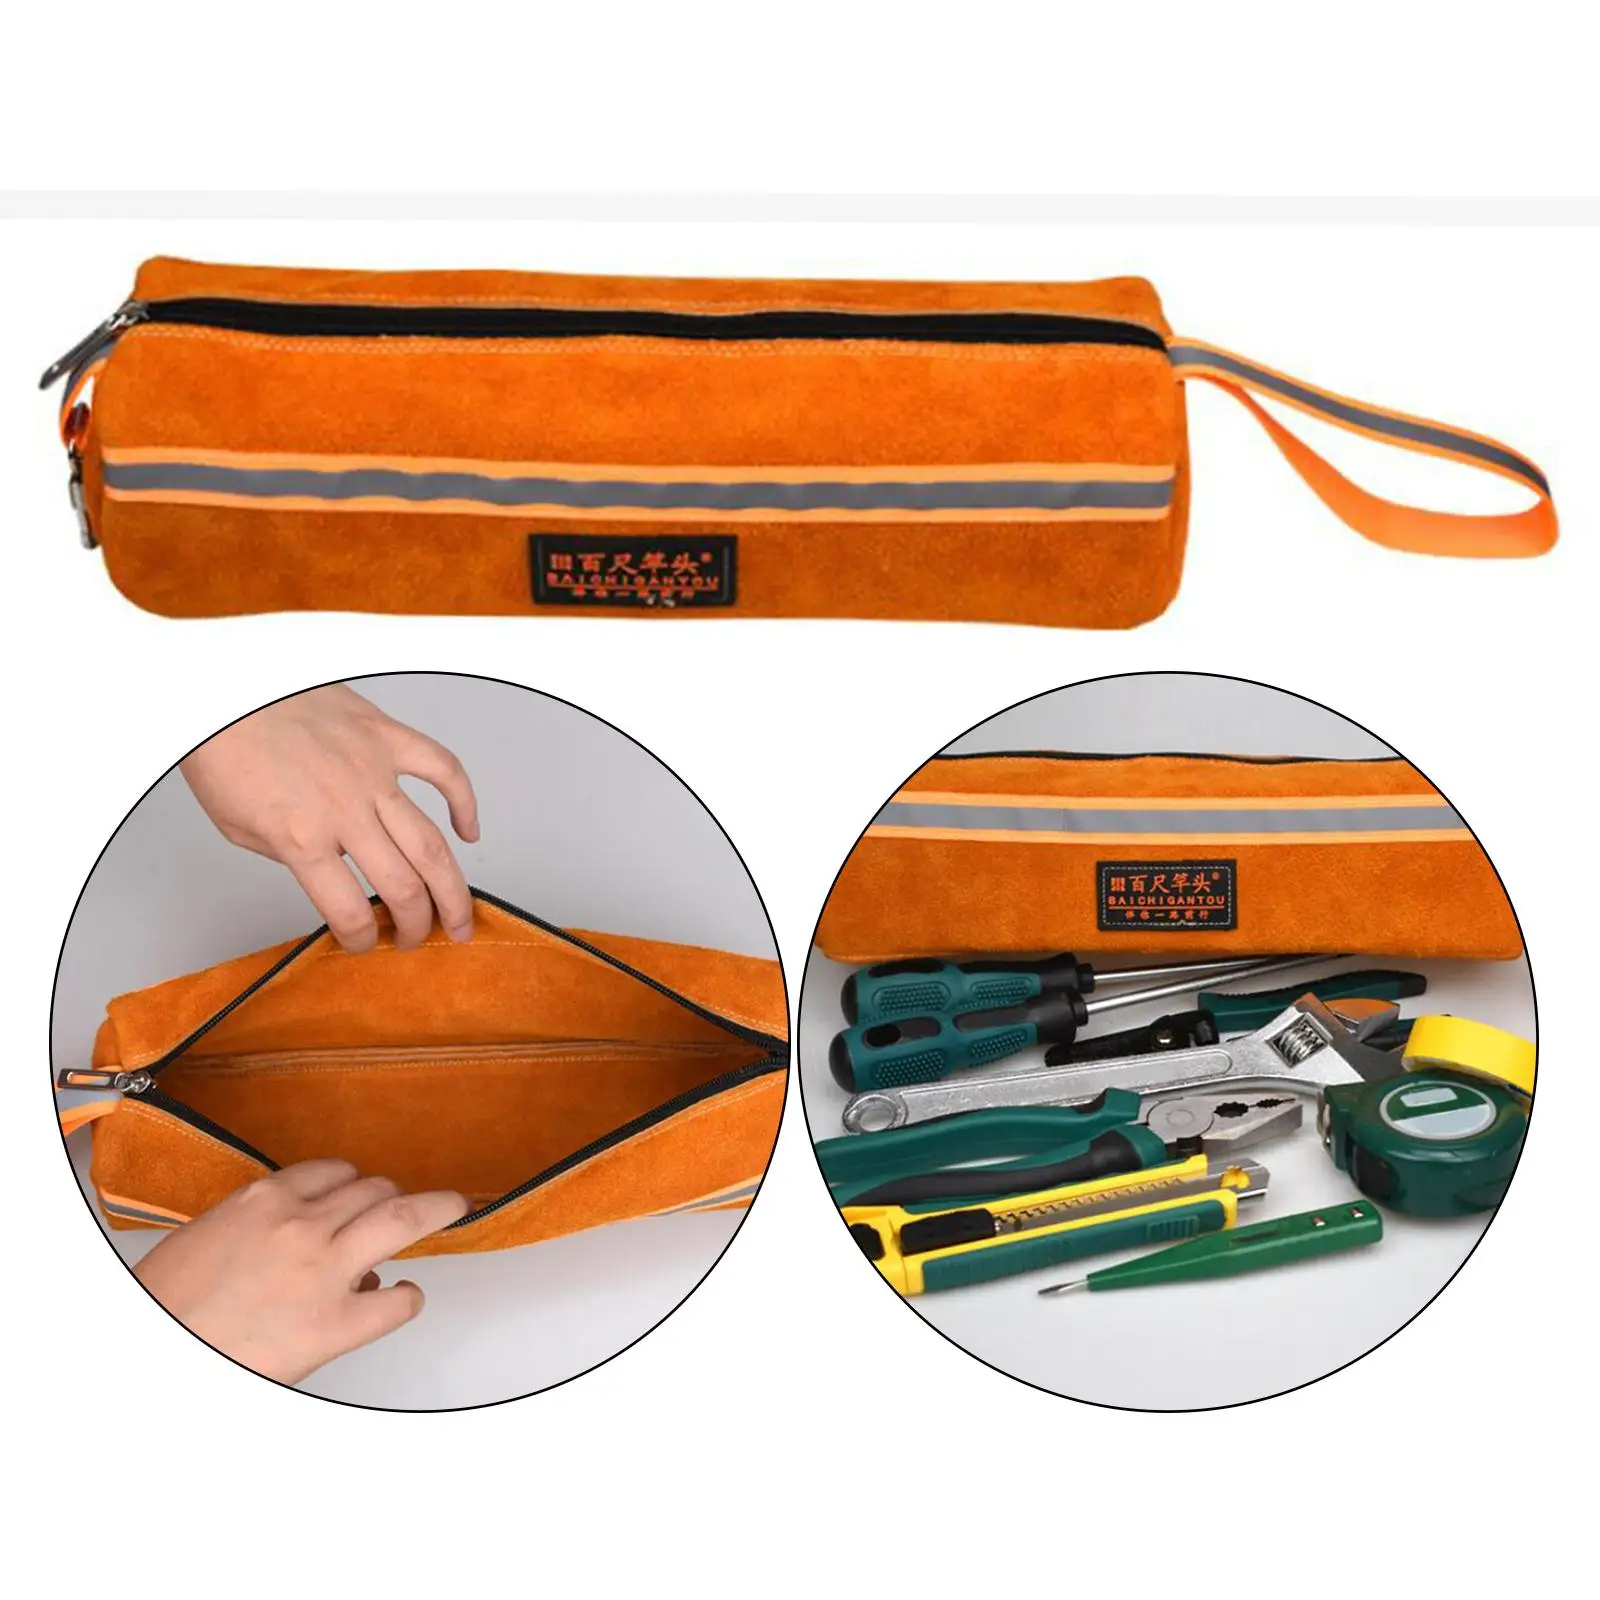 Portable Hand Tool Bag Heavy Duty with Wide Mouth Cowhide Multiple Purpose for Home DIY Gardening Carpentry Camping Handyman